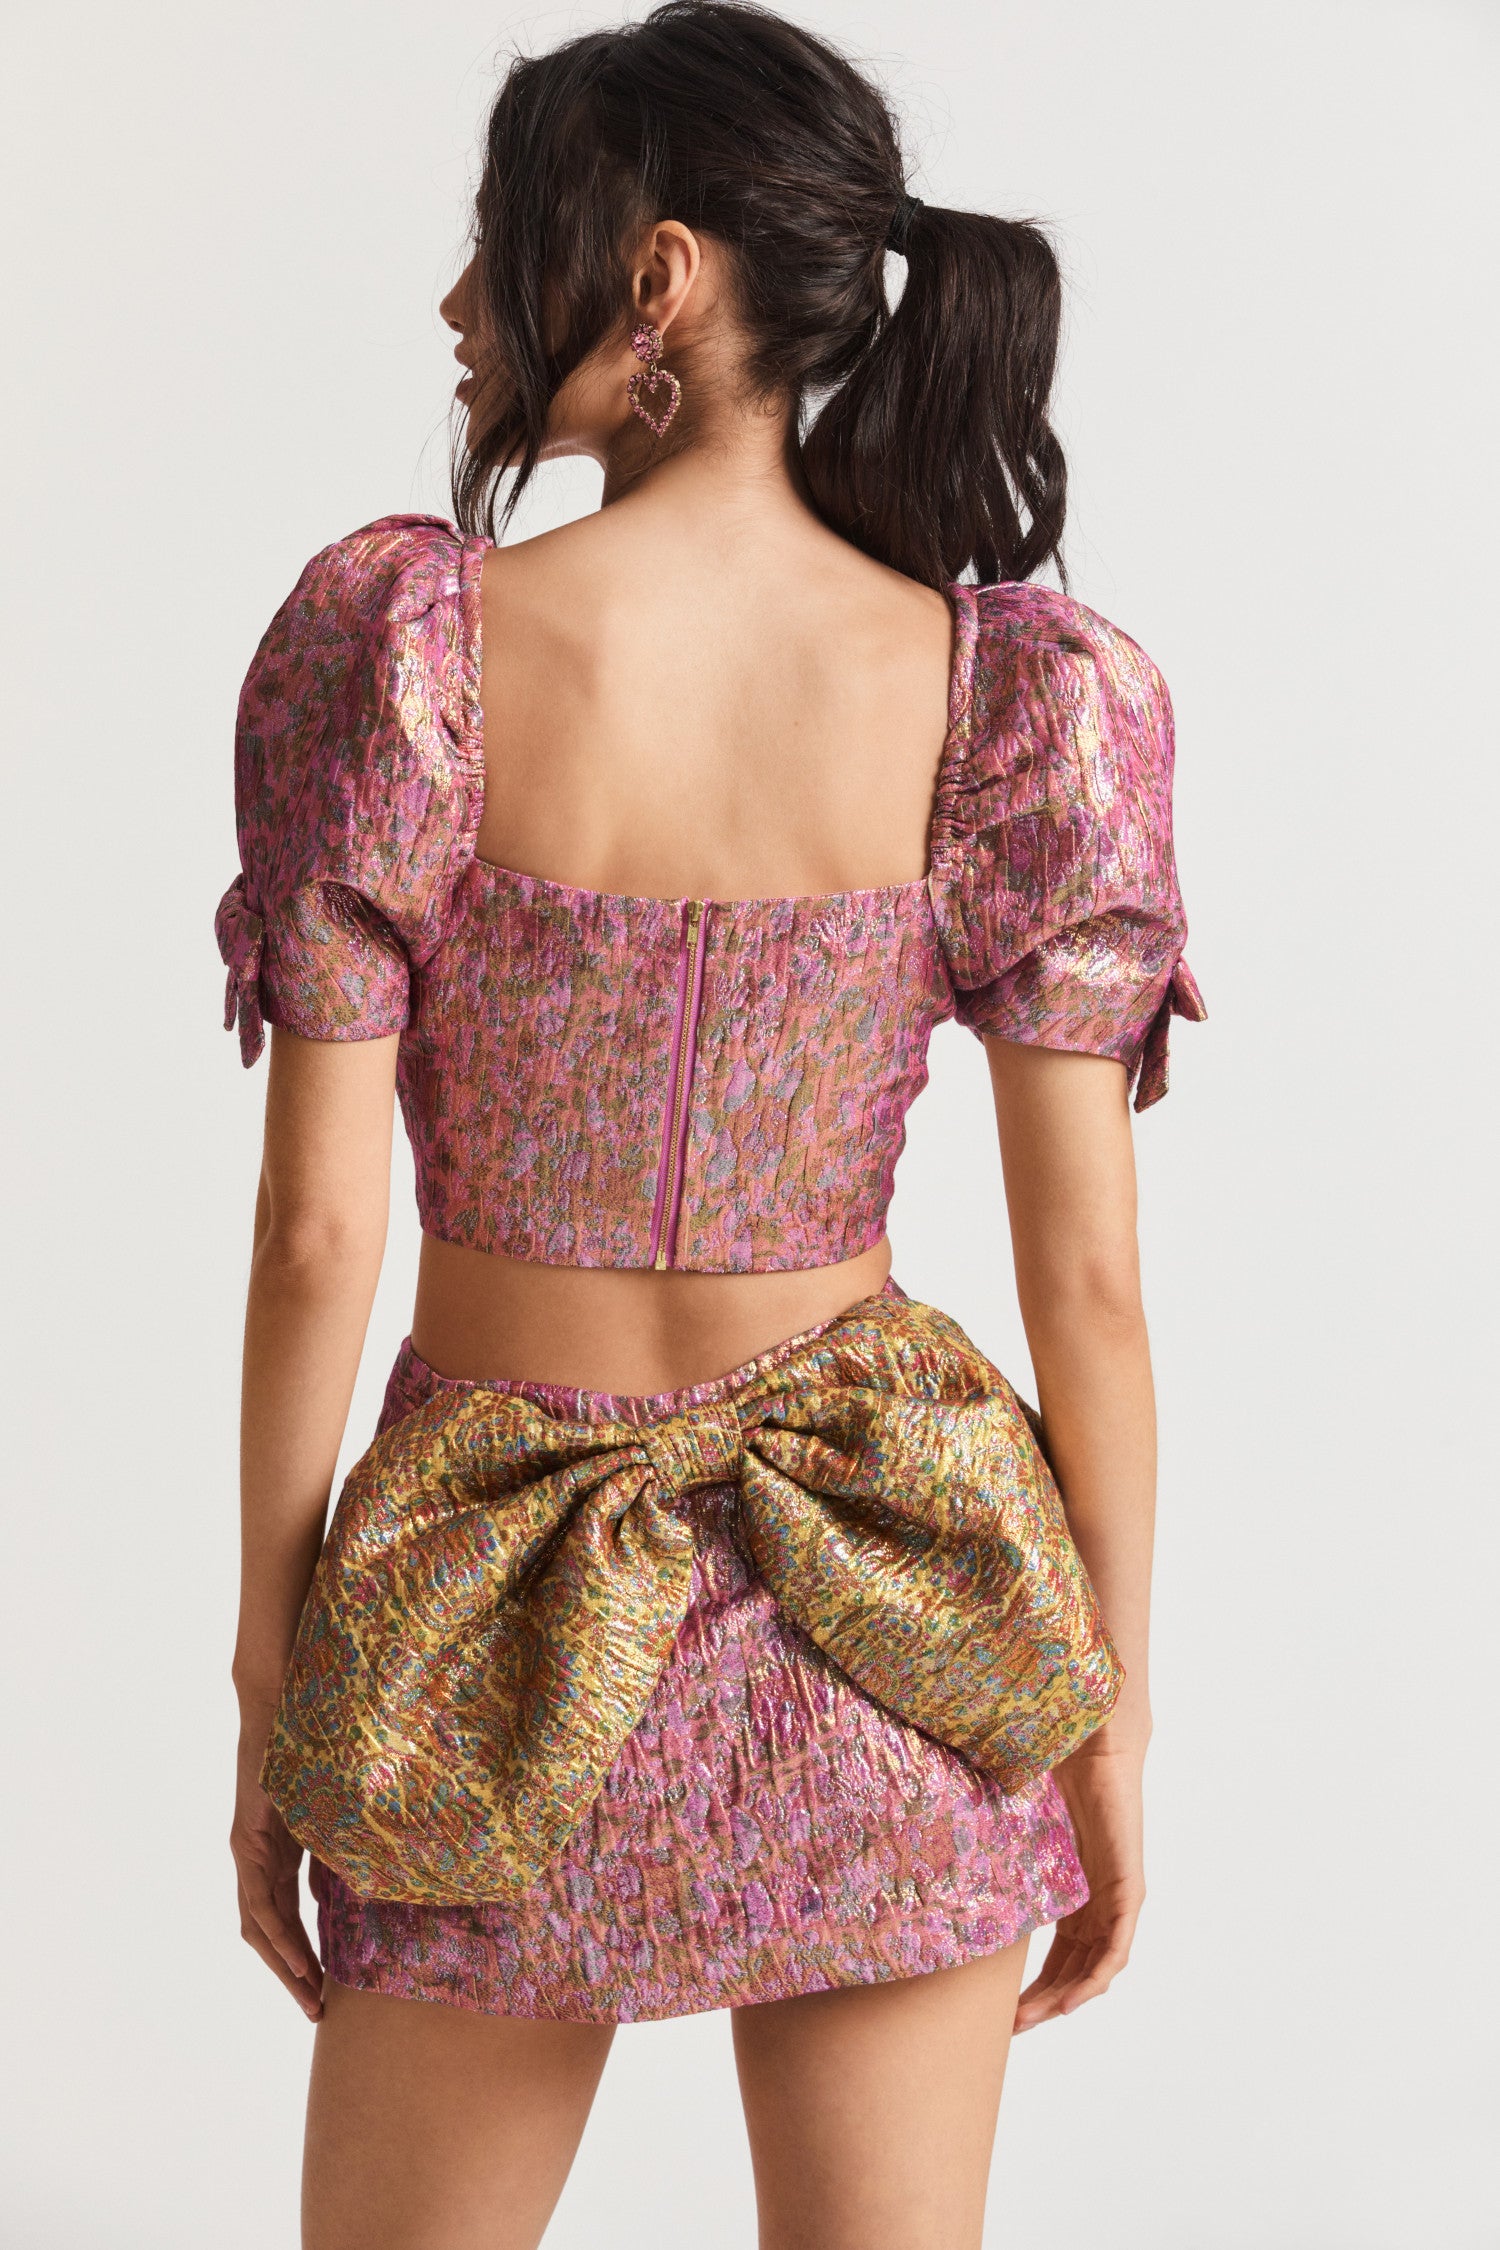  Pink ultra crop top with textural crocheted fabric with and floral print. Puffy sleeves with elastic at the shoulder opening, tiny bows at the sleeves opening, and an exposed zipper at the back bodice. 